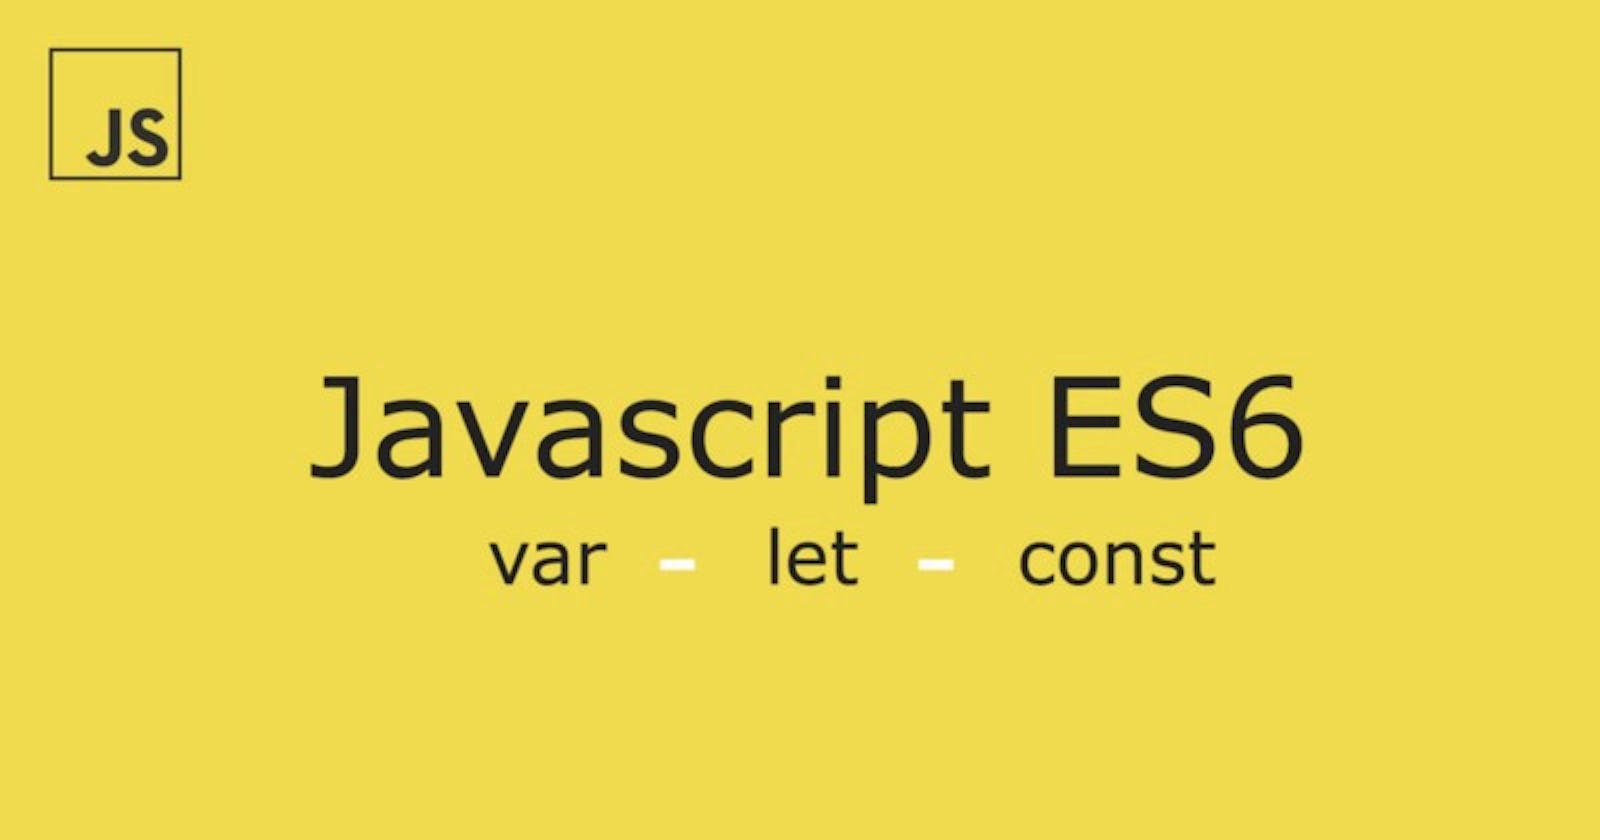 Explained - The Difference Between Var, Let and Const in JavaScript